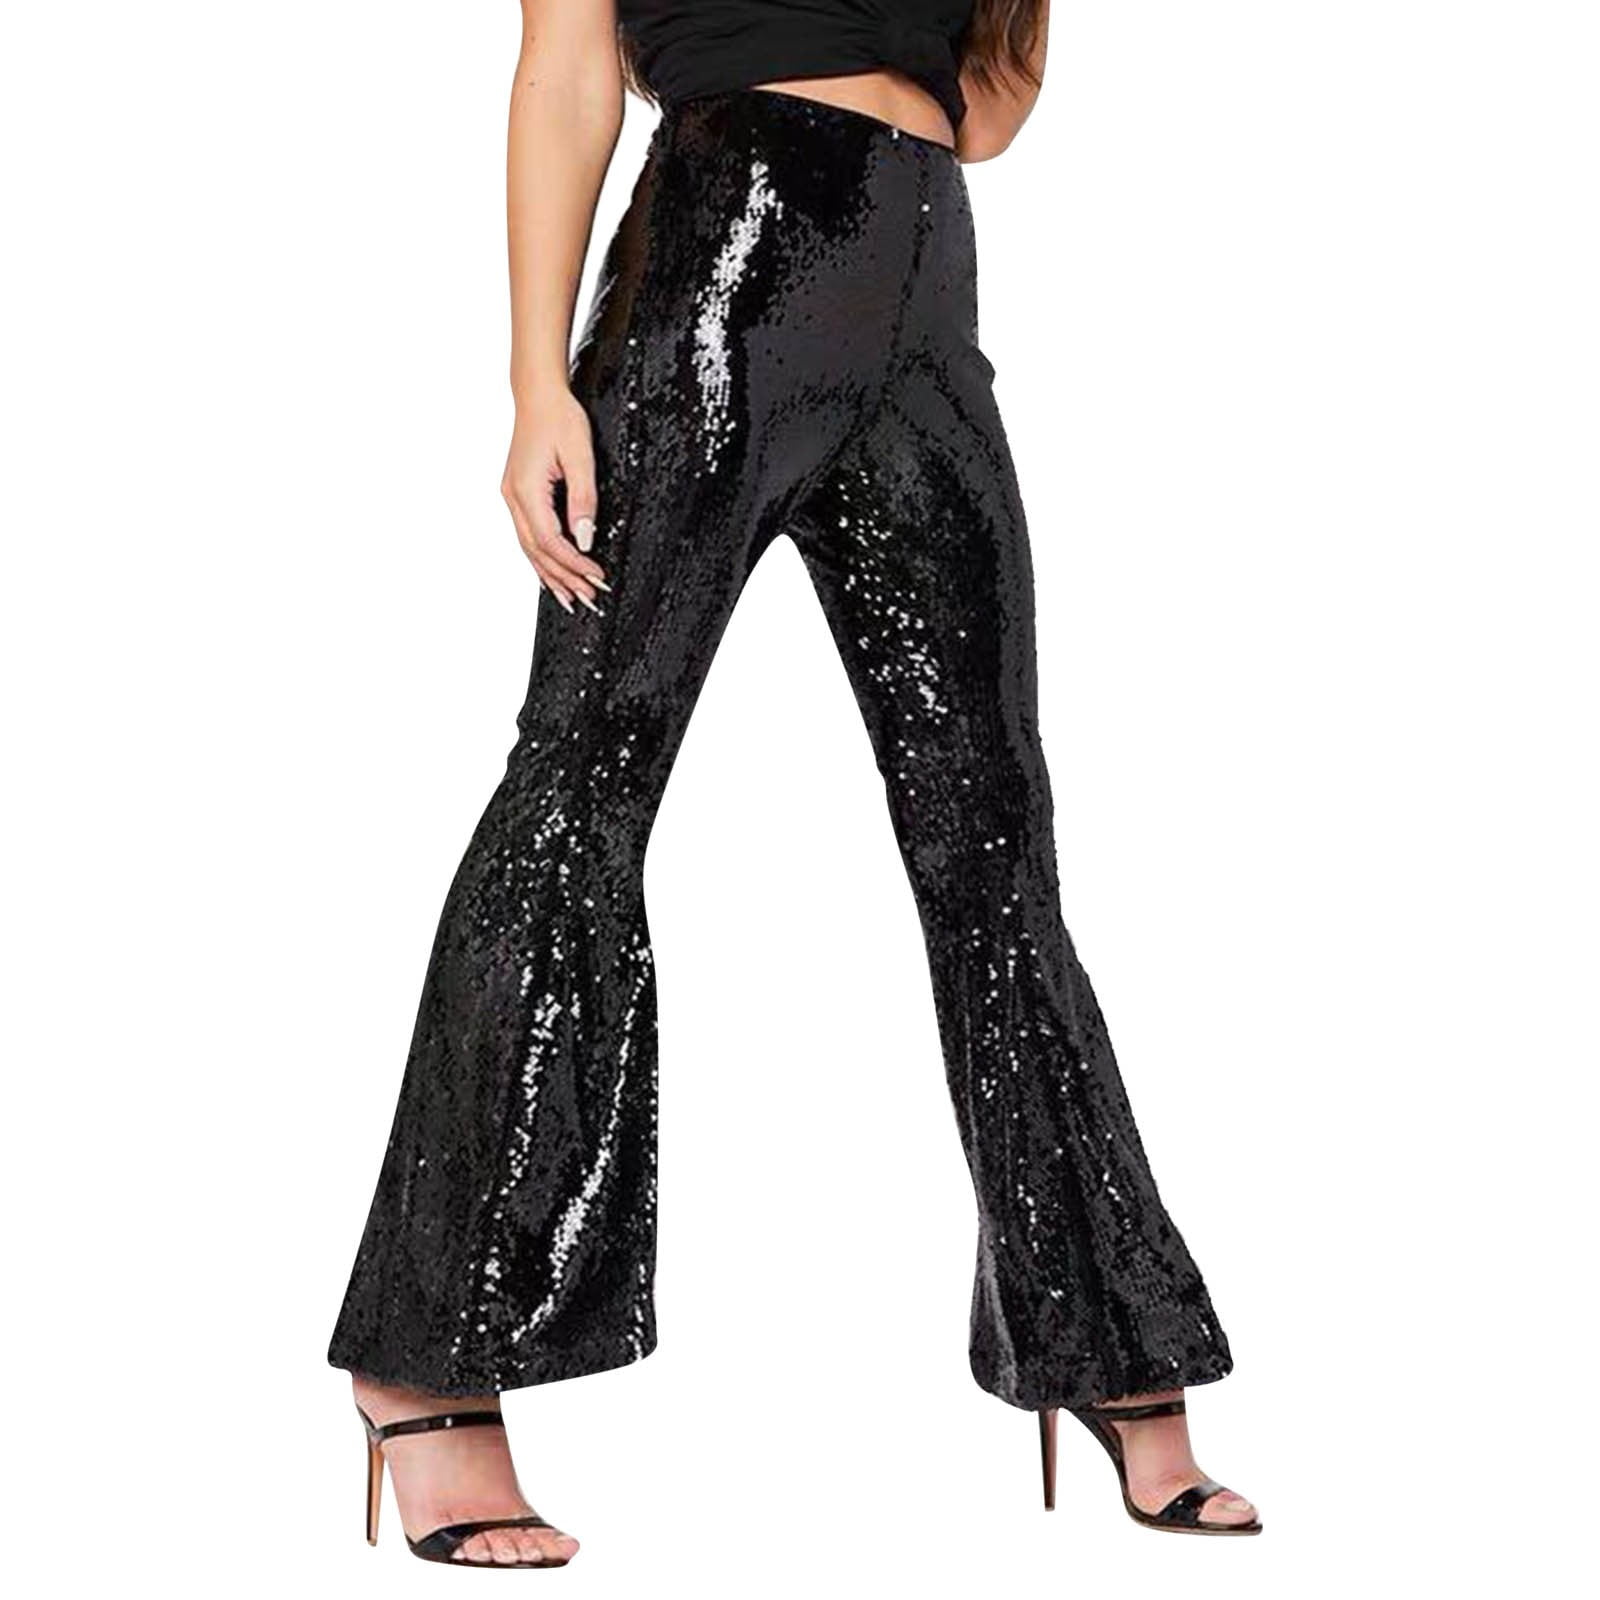 Baocc Sequins Pants for Women, Women's Sexy Sequined Shiny High Waist ...